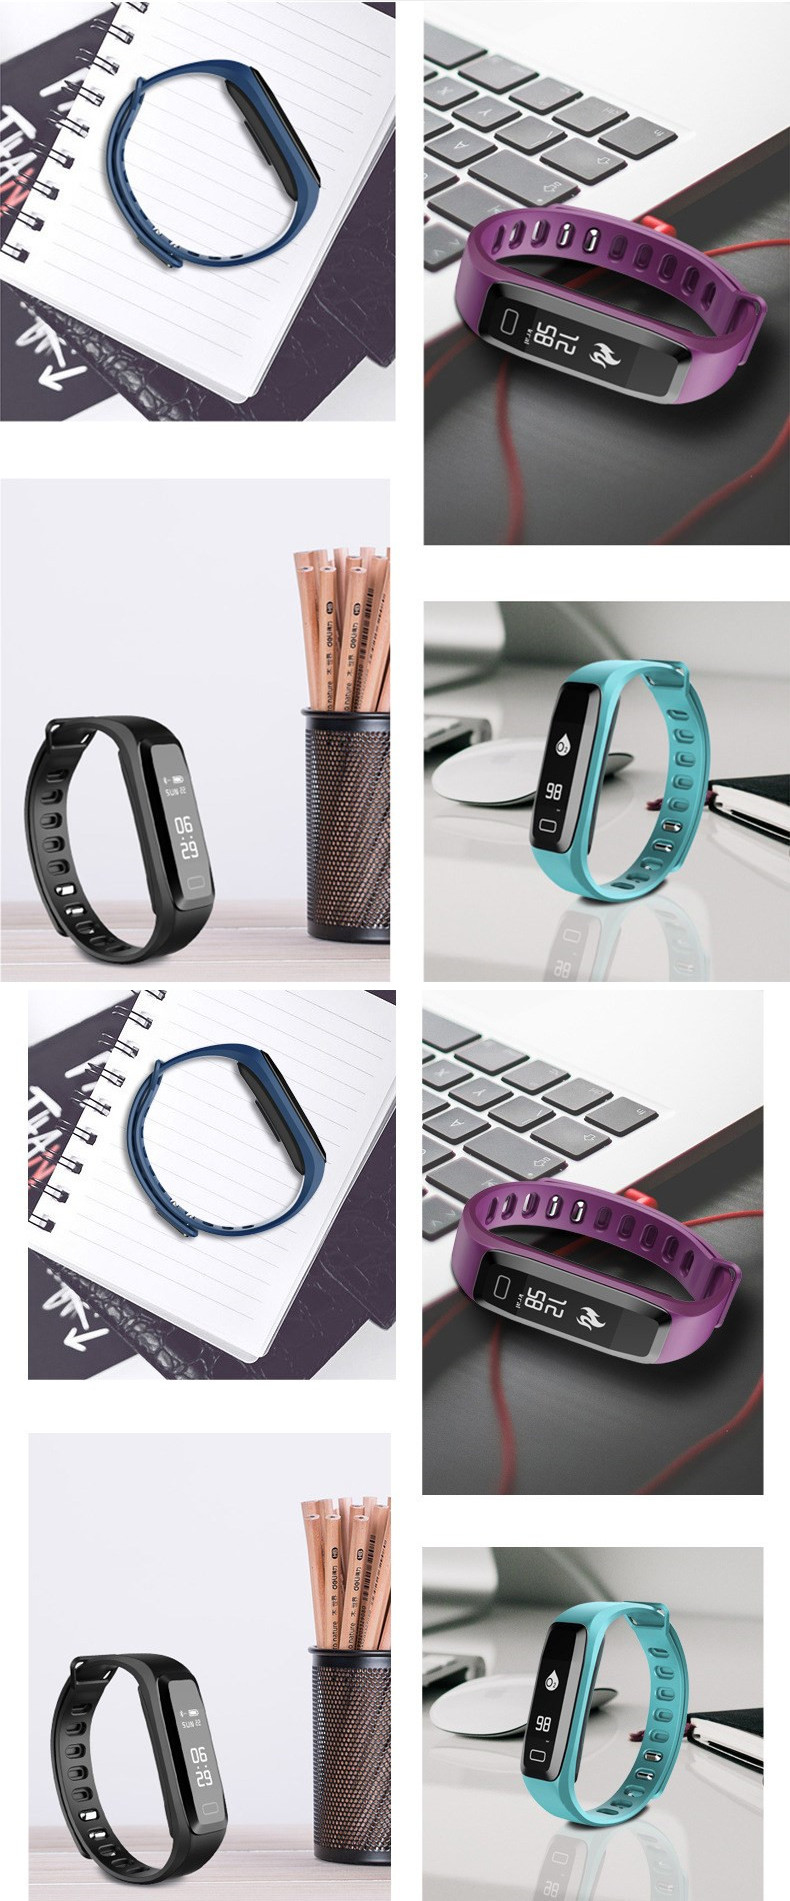 Bluetooth-43-Smart-Band-IP67-IOS-Android-MIUI-Heart-Rate-Blood-Pressure-Pedometer-Remote-Camera-1157229